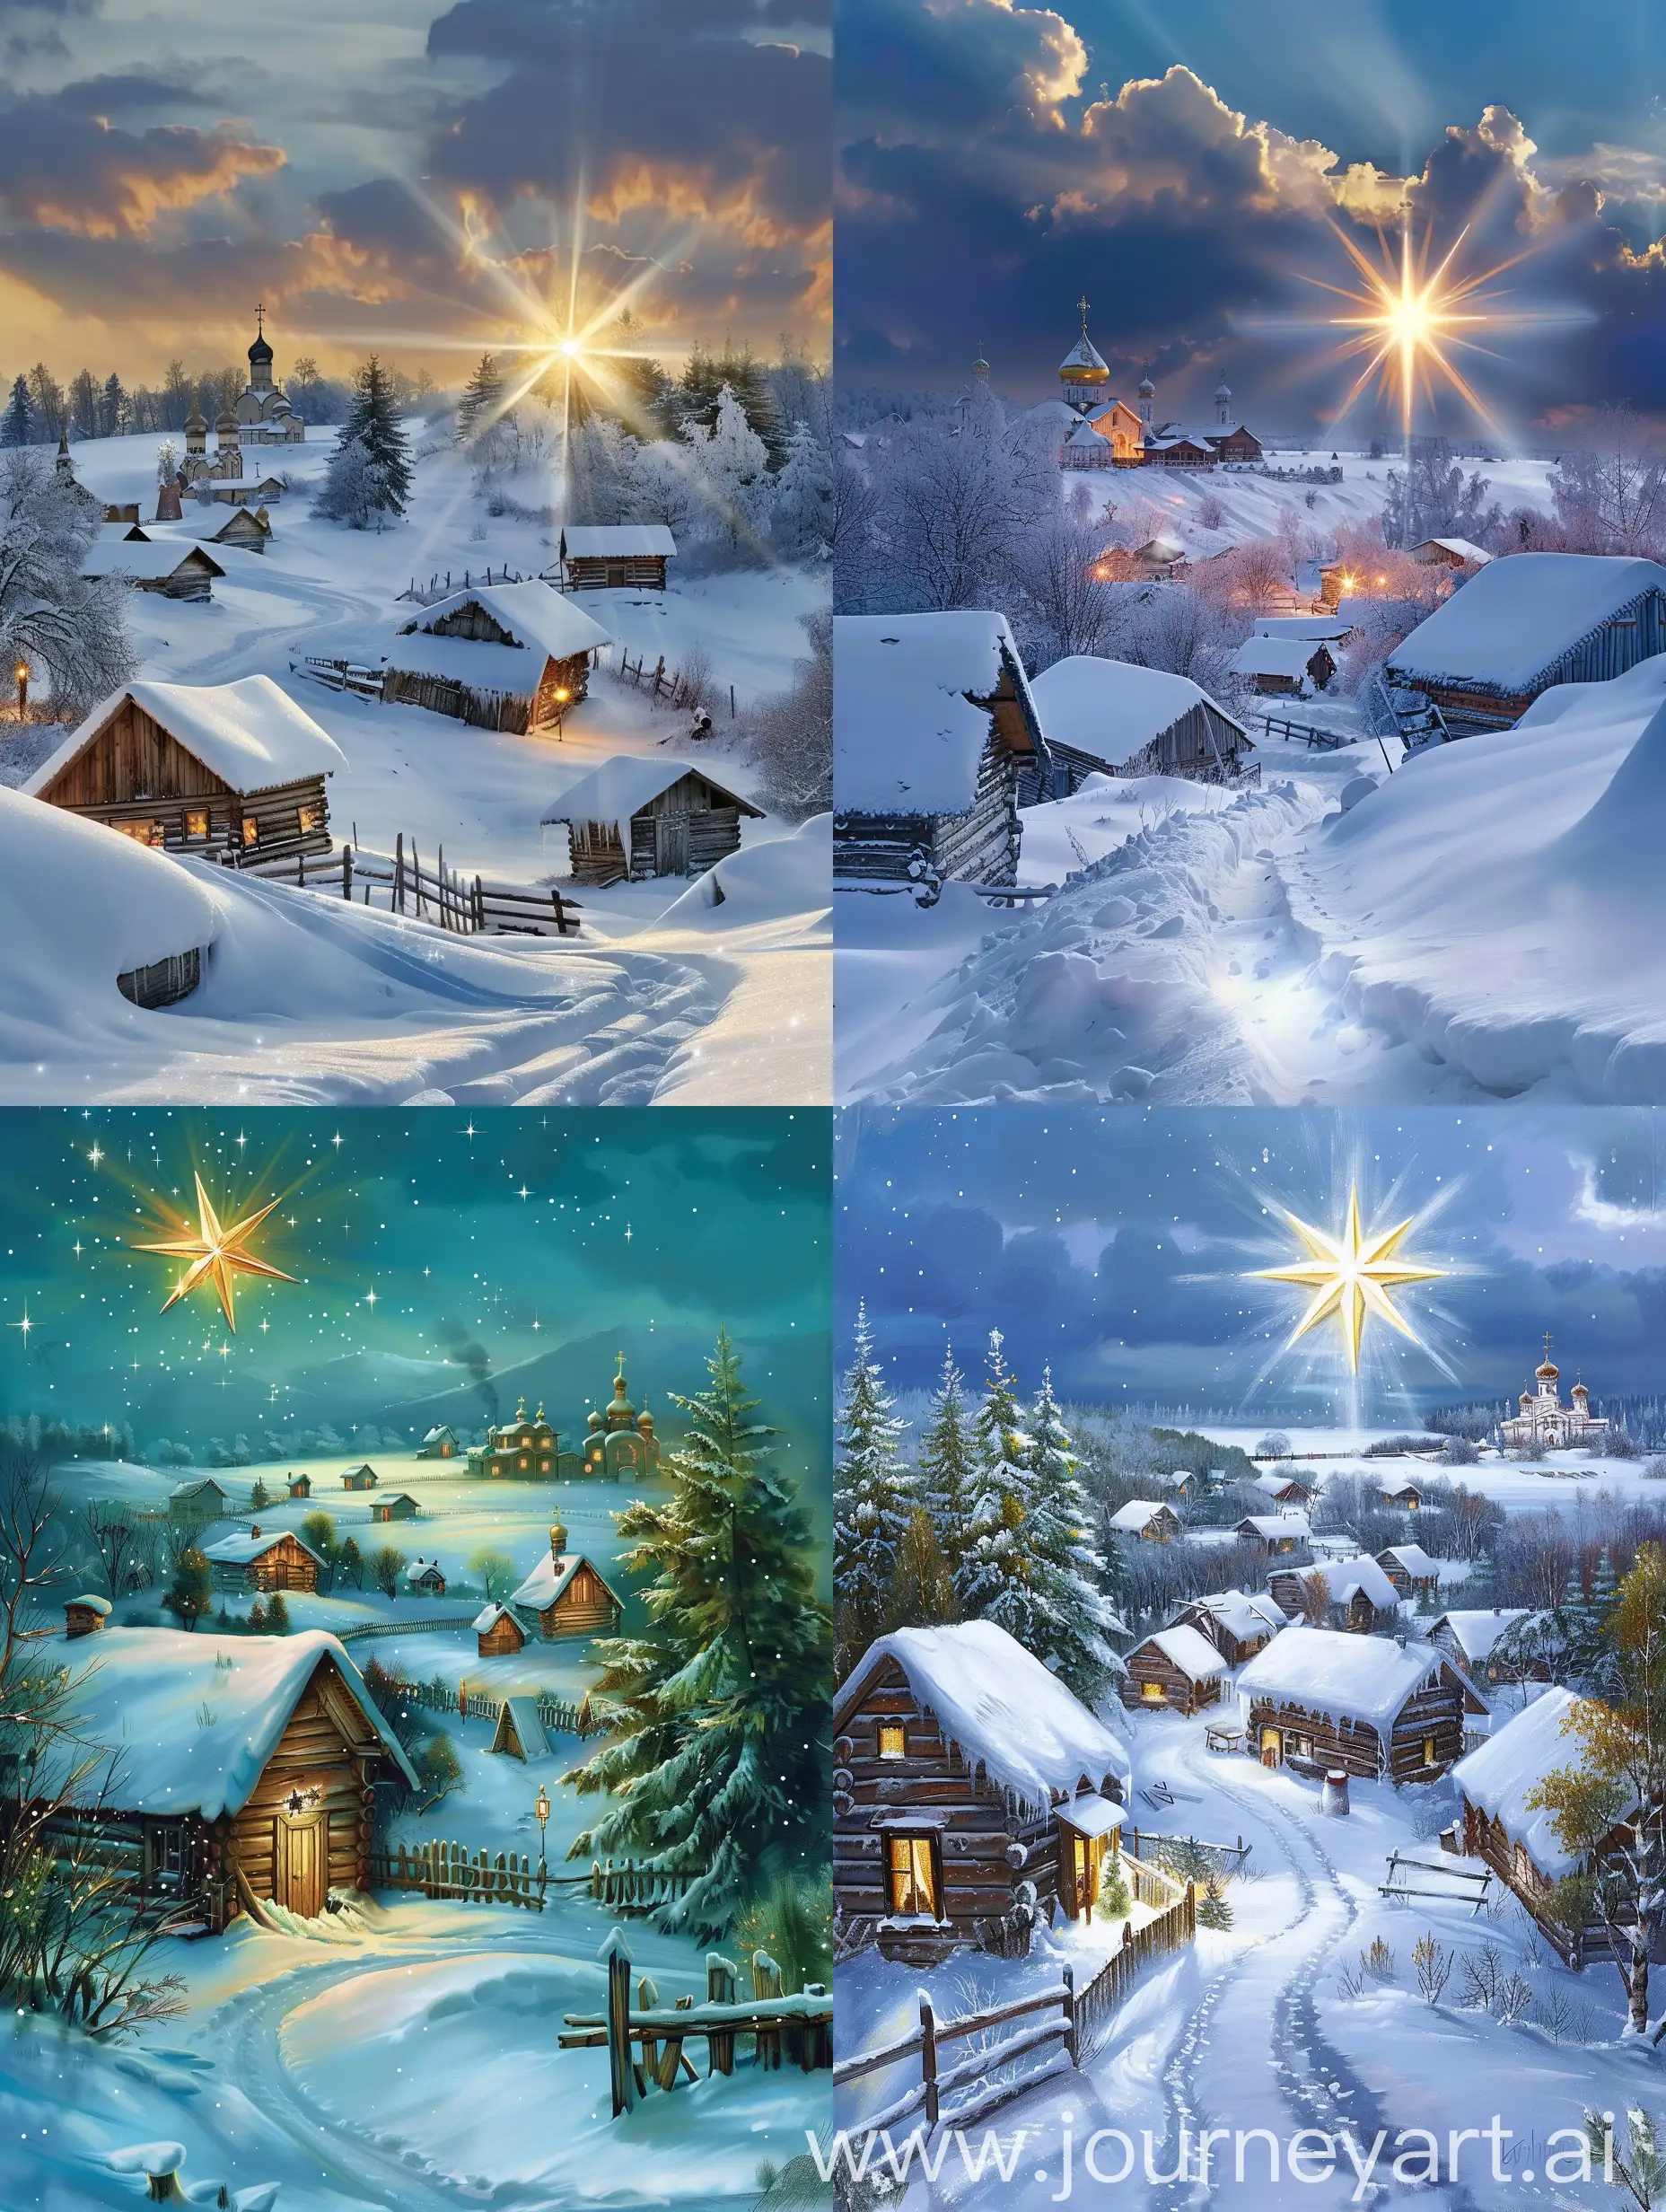 Star of Bethlehem Over Snowy Russian Landscape: "The Star of Bethlehem shining brightly over a snow-covered medieval Russian landscape, illuminating traditional wooden cottages and a distant orthodox monastery." based in Anatoly Timofeevich Fomenko e Gleb Vladimirovich Nosovsk books